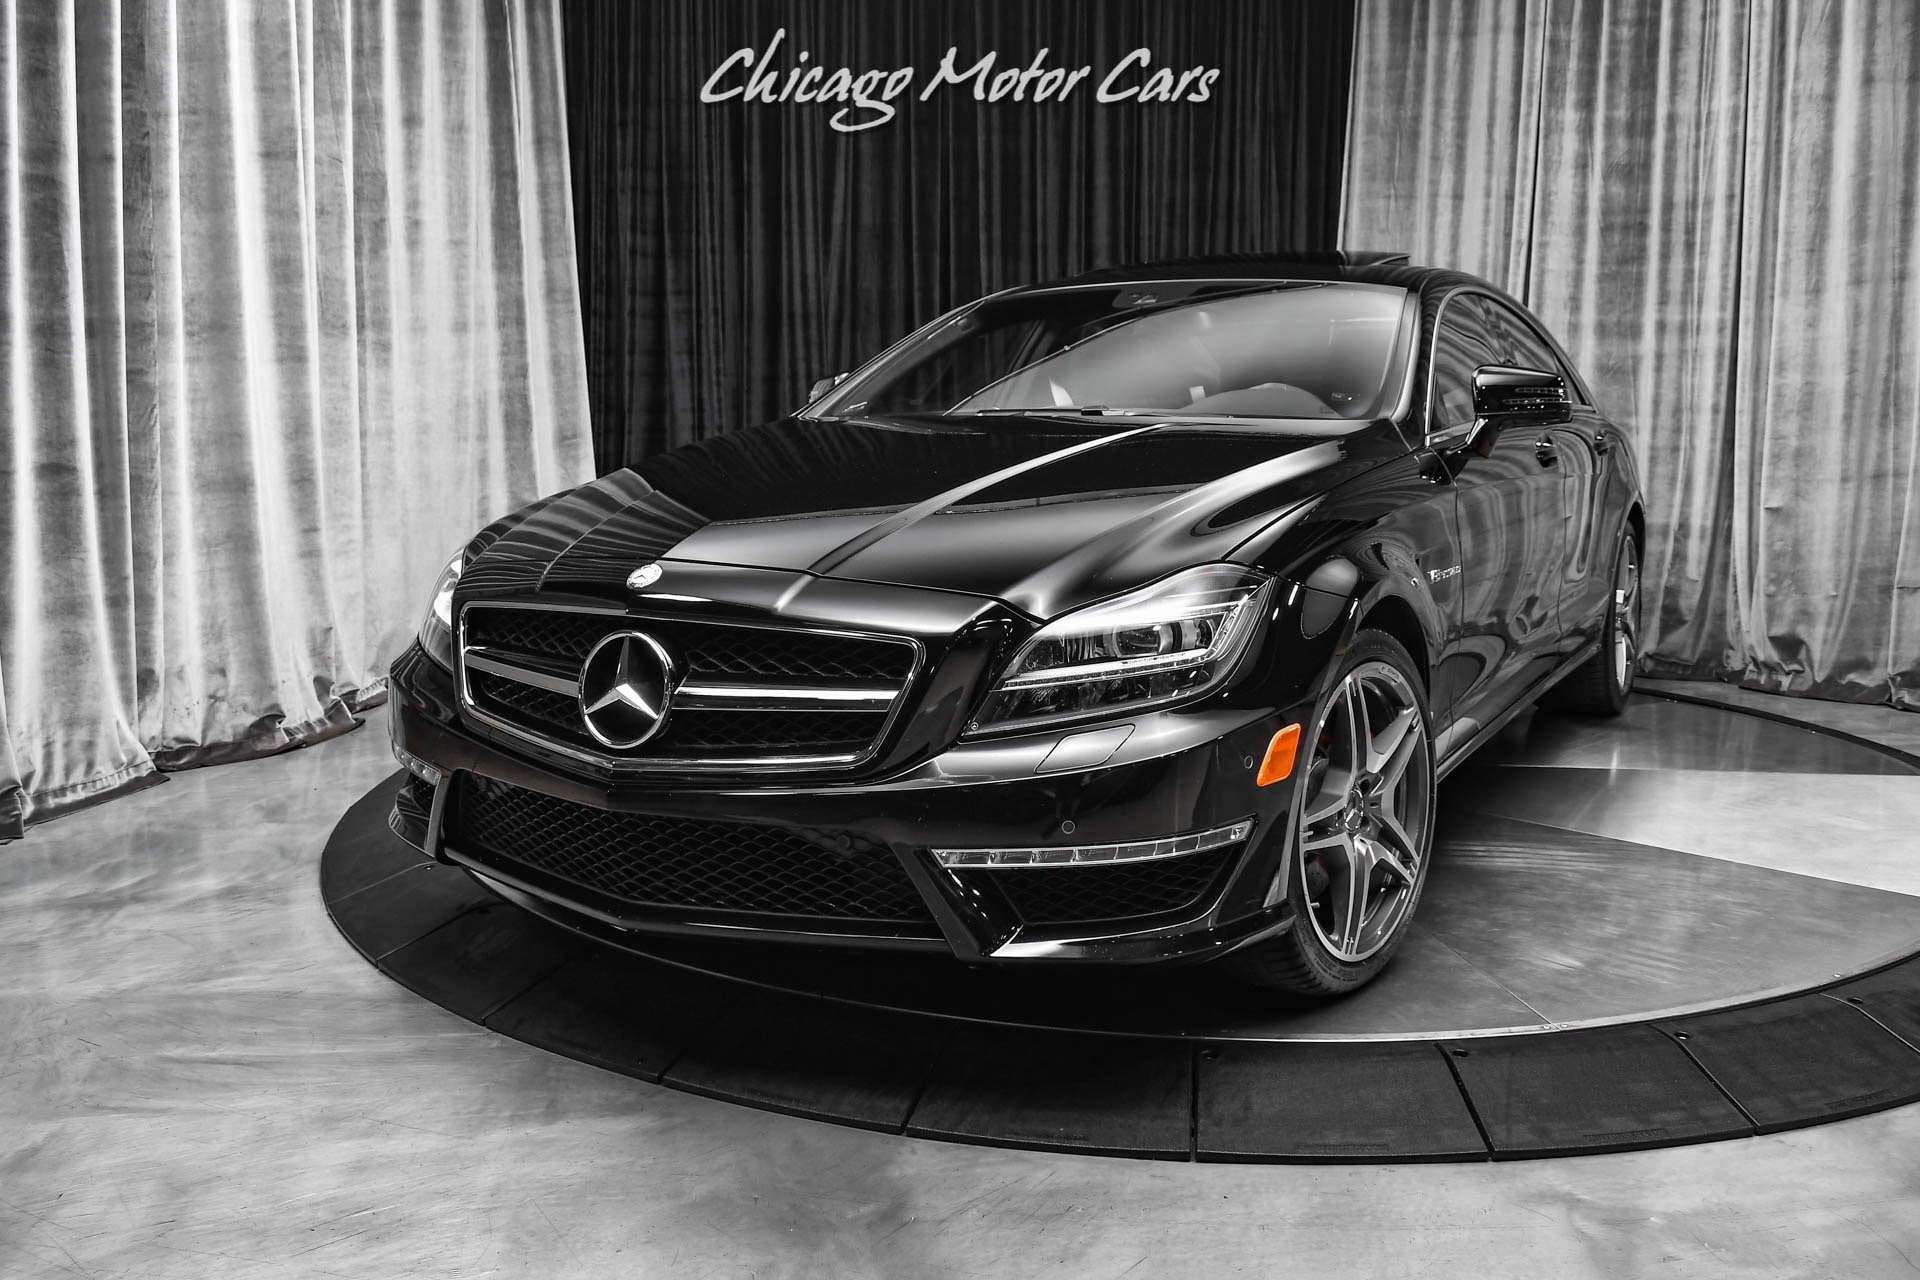 Used-2014-Mercedes-Benz-CLS63-AMG-4MATIC-114kMSRP-S-Model-577HP-Premium-Package-1-LOW-Miles